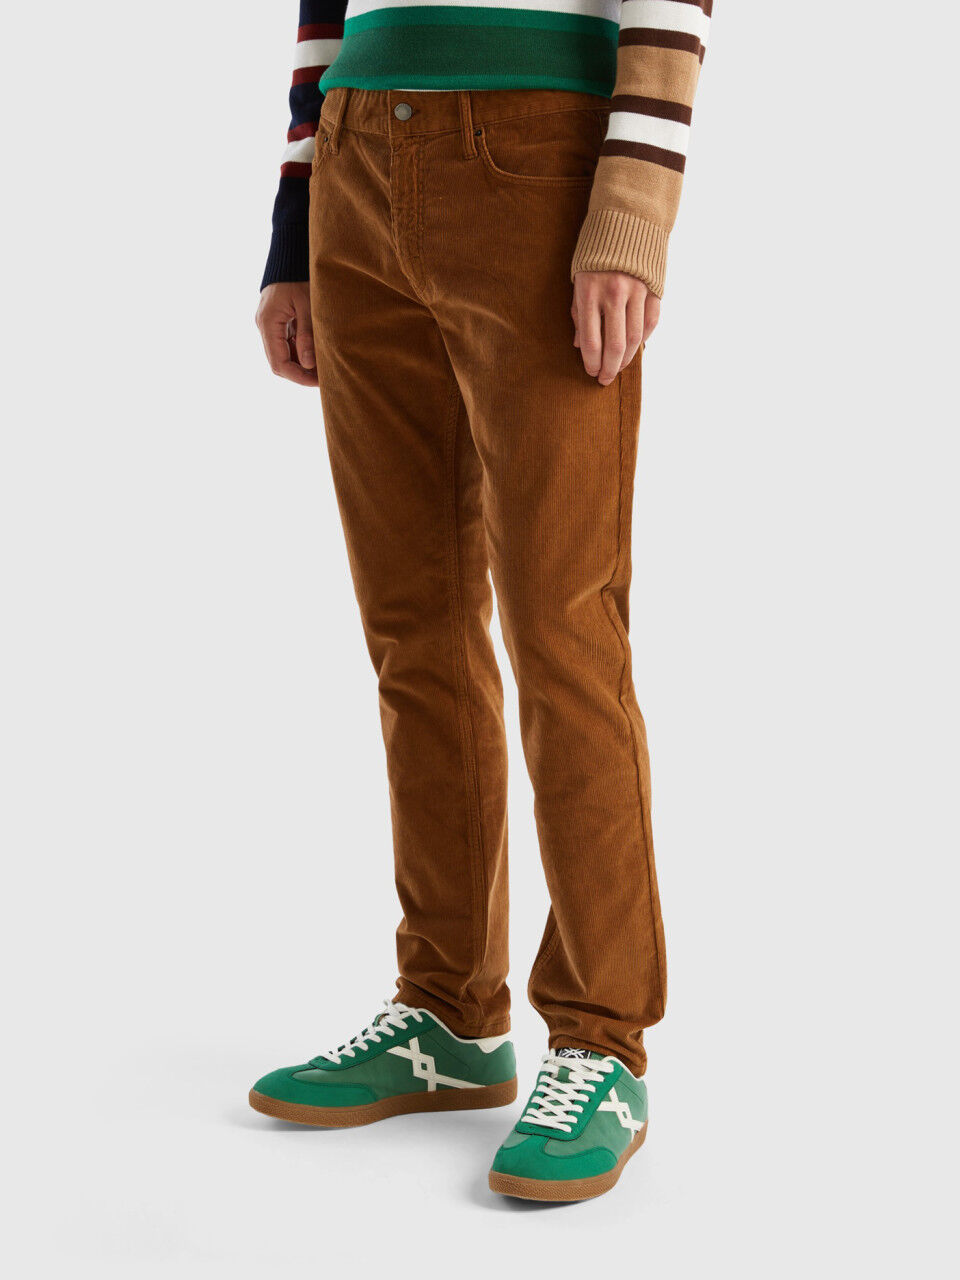 Buy United Colors of Benetton Grey Solid Pattern Slim Fit Trousers online